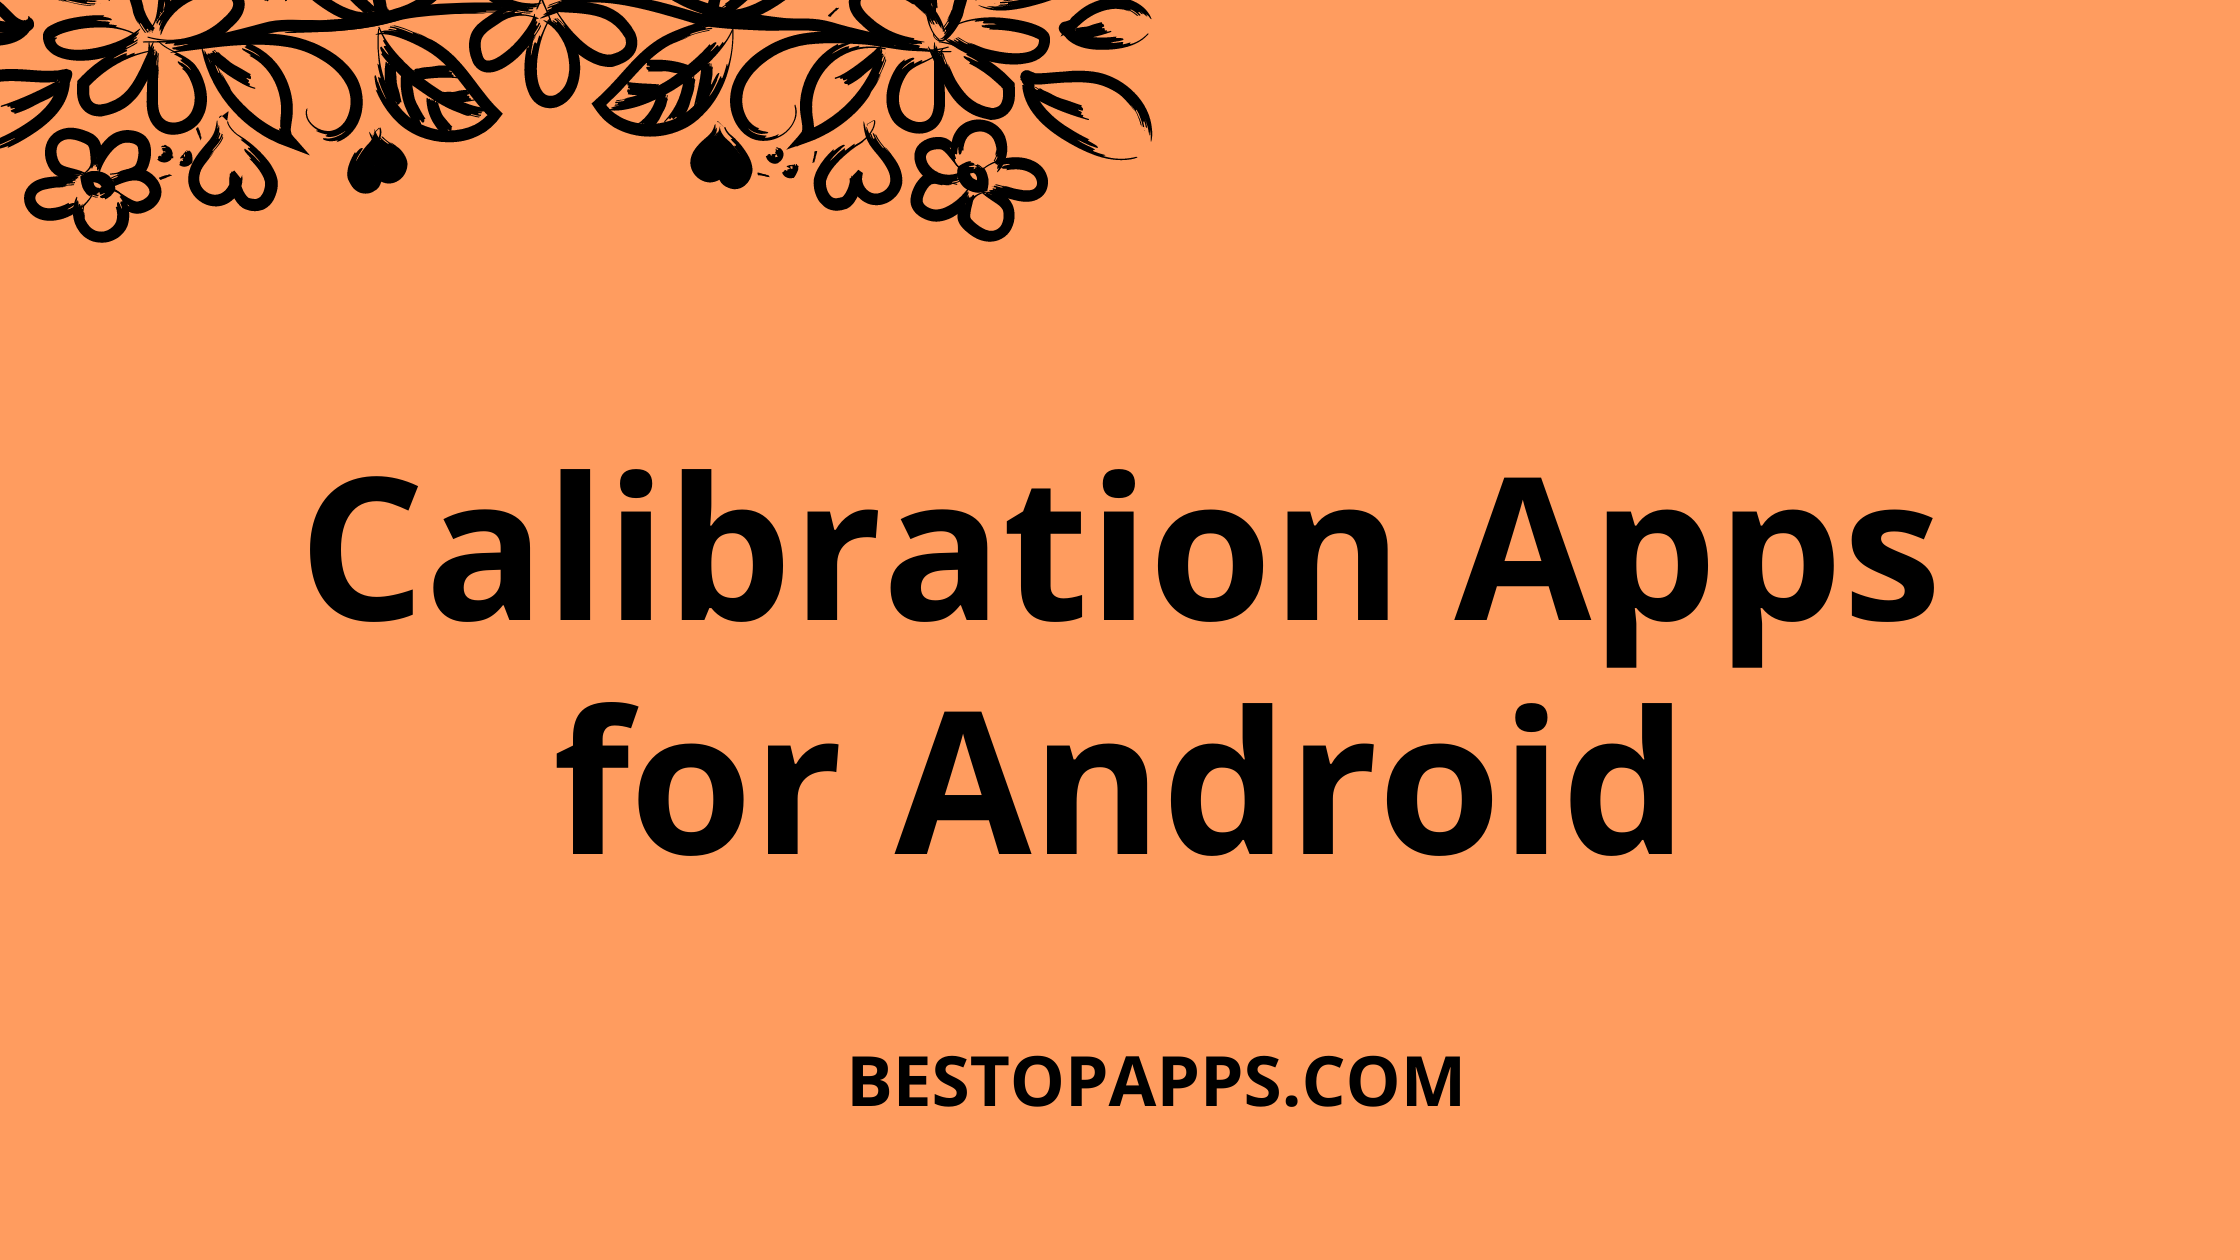 Calibration Apps for Android